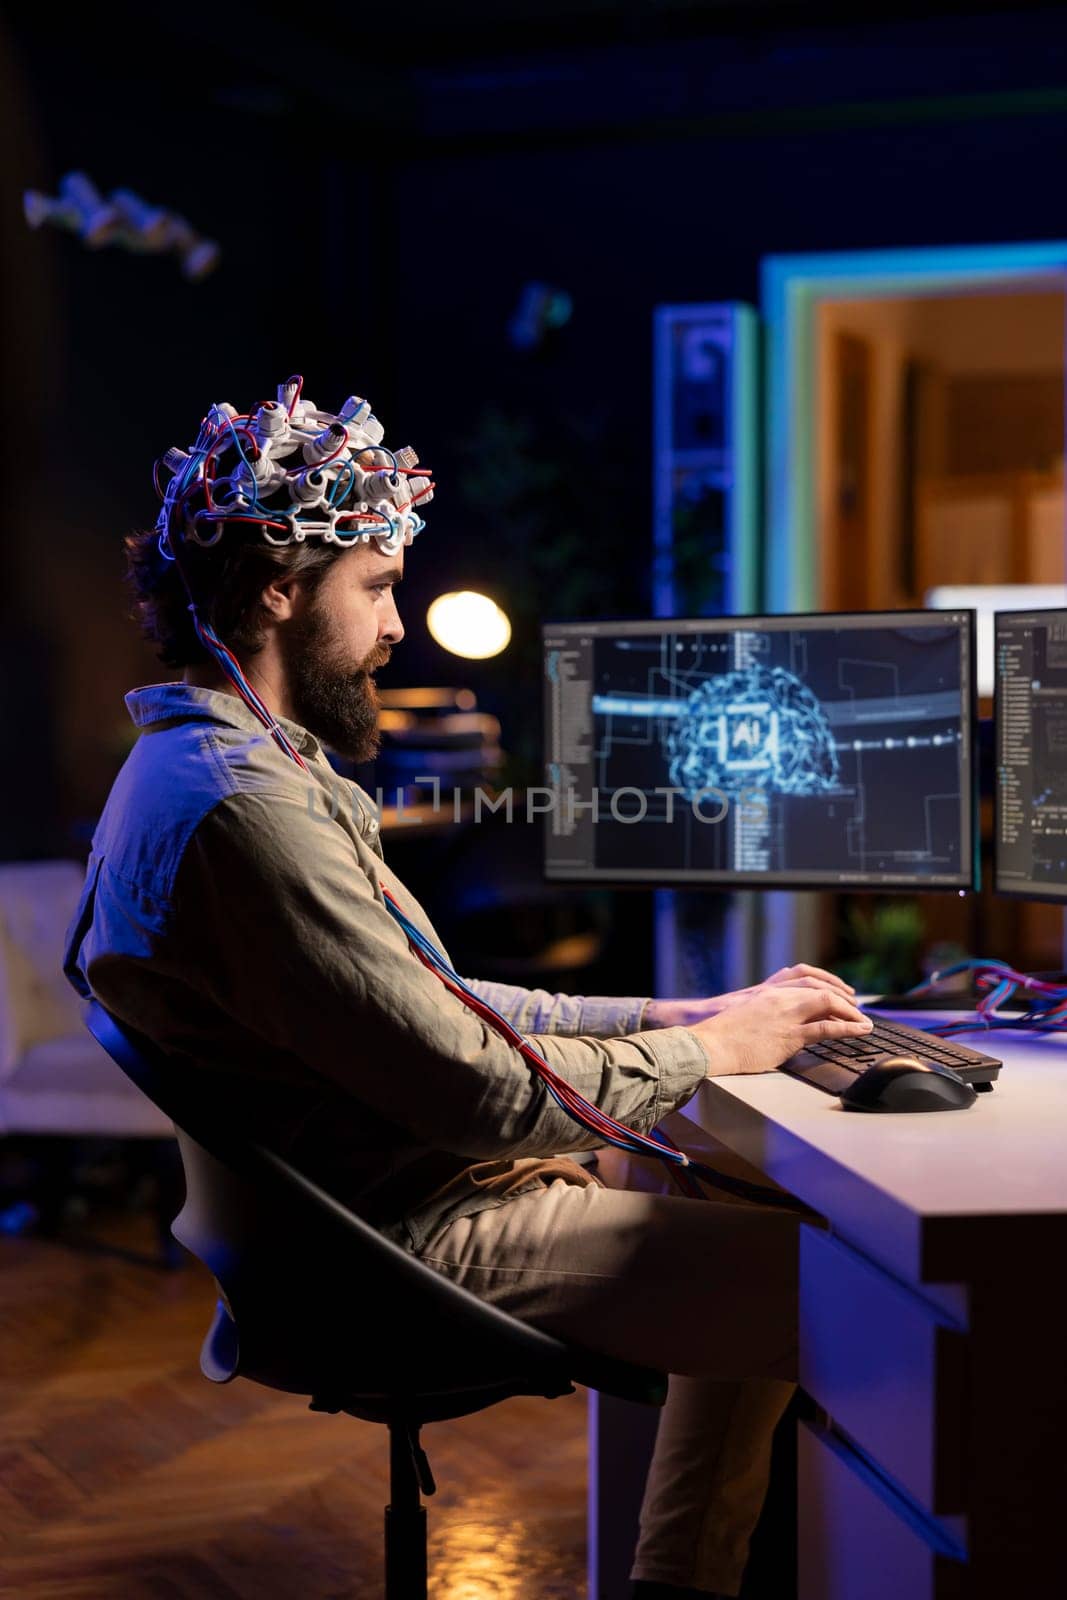 Computer engineer with EEG headset on writing code allowing him to transfer mind into virtual world, becoming one with AI. Crazy scientist using neuroscientific tech to gain superintelligence